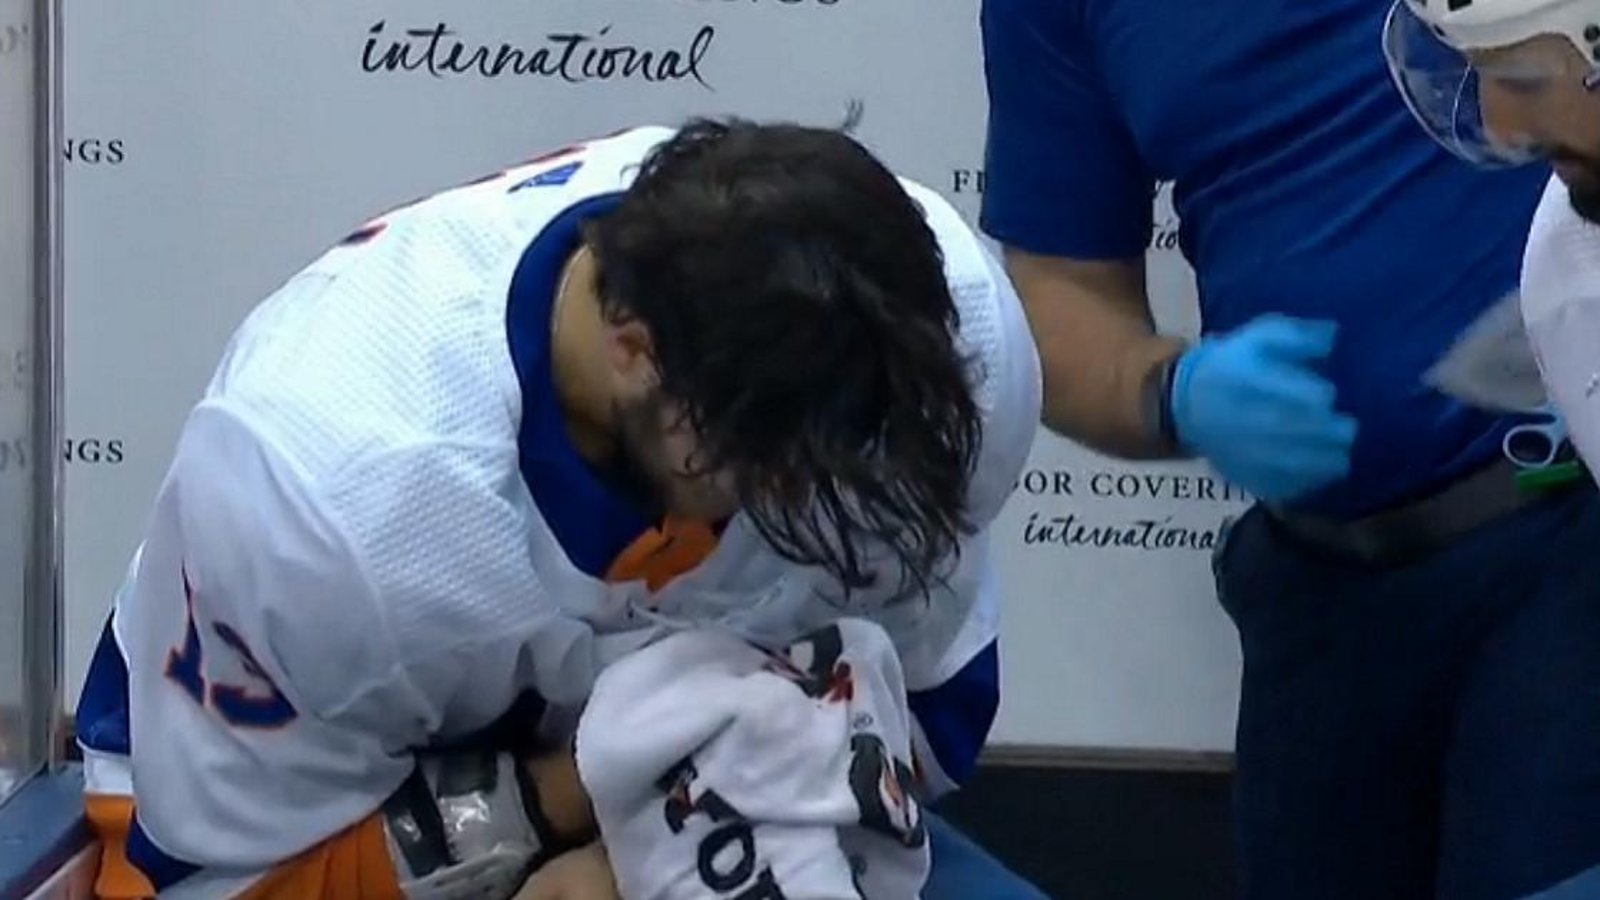 Eberle accidently gives Barzal a serious hack to the face.